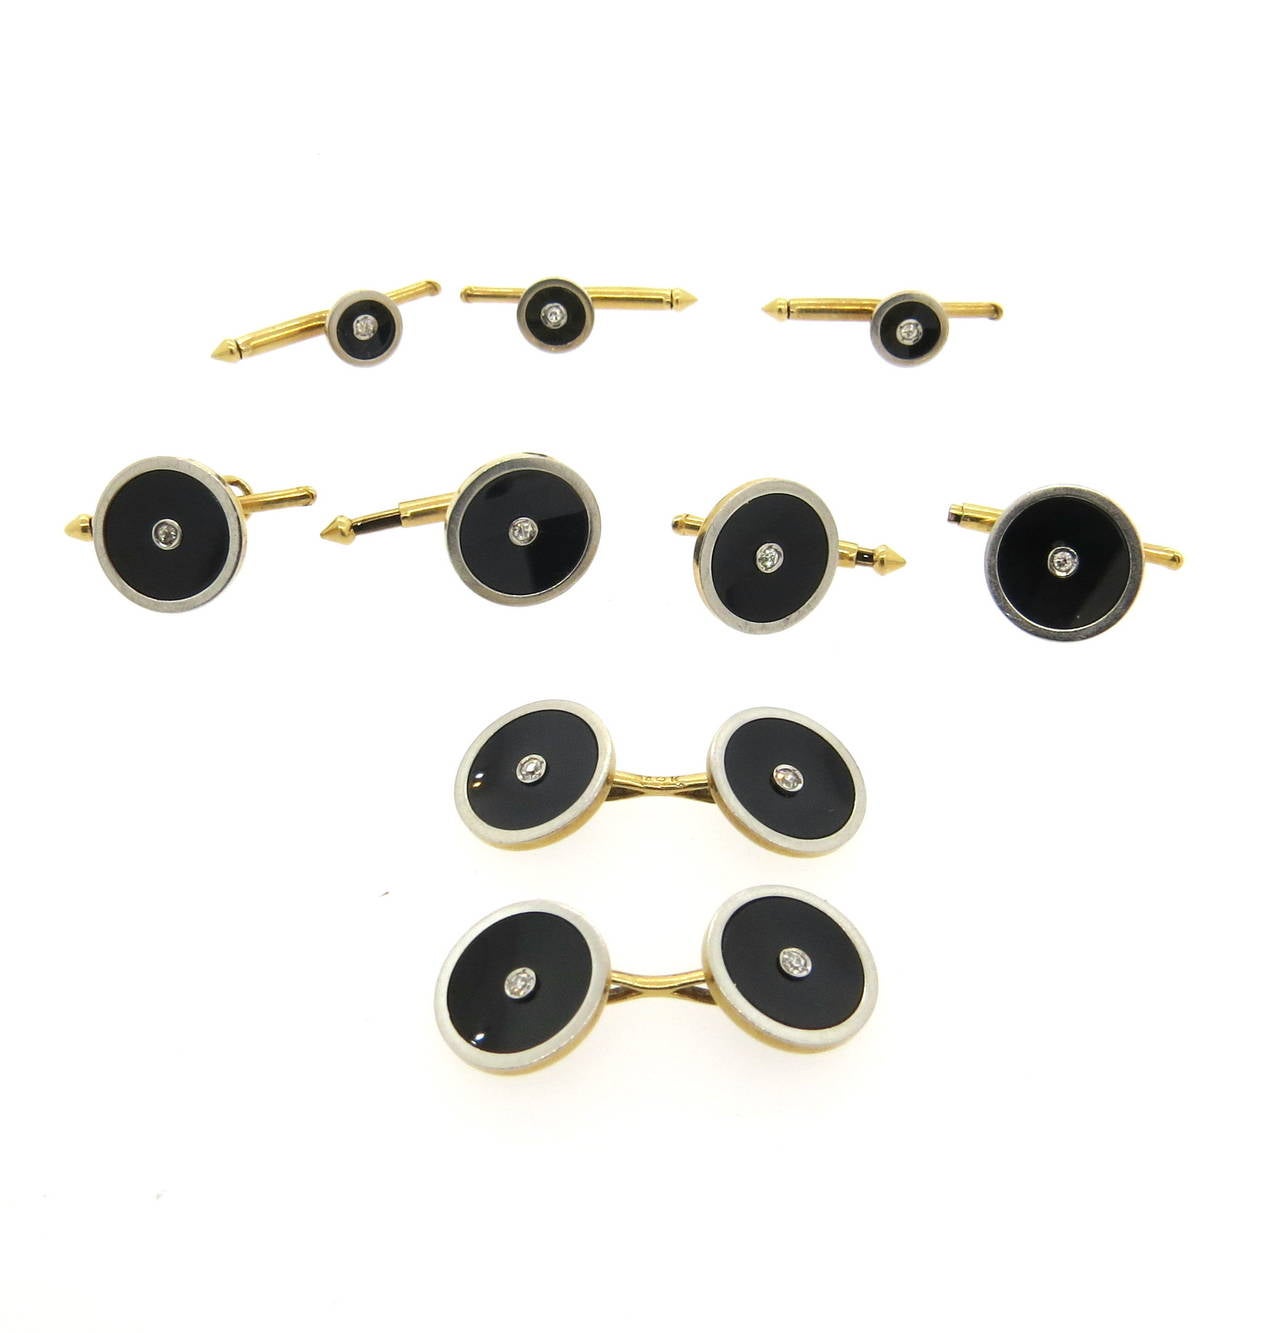 A 14k gold and onyx dress set with approximately 0.33ctw of H/VS diamonds.  The cufflinks and buttons measure 12.5mm in diameter, and the studs measure 7mm in diameter.  The weight of the set is 15.4 grams.